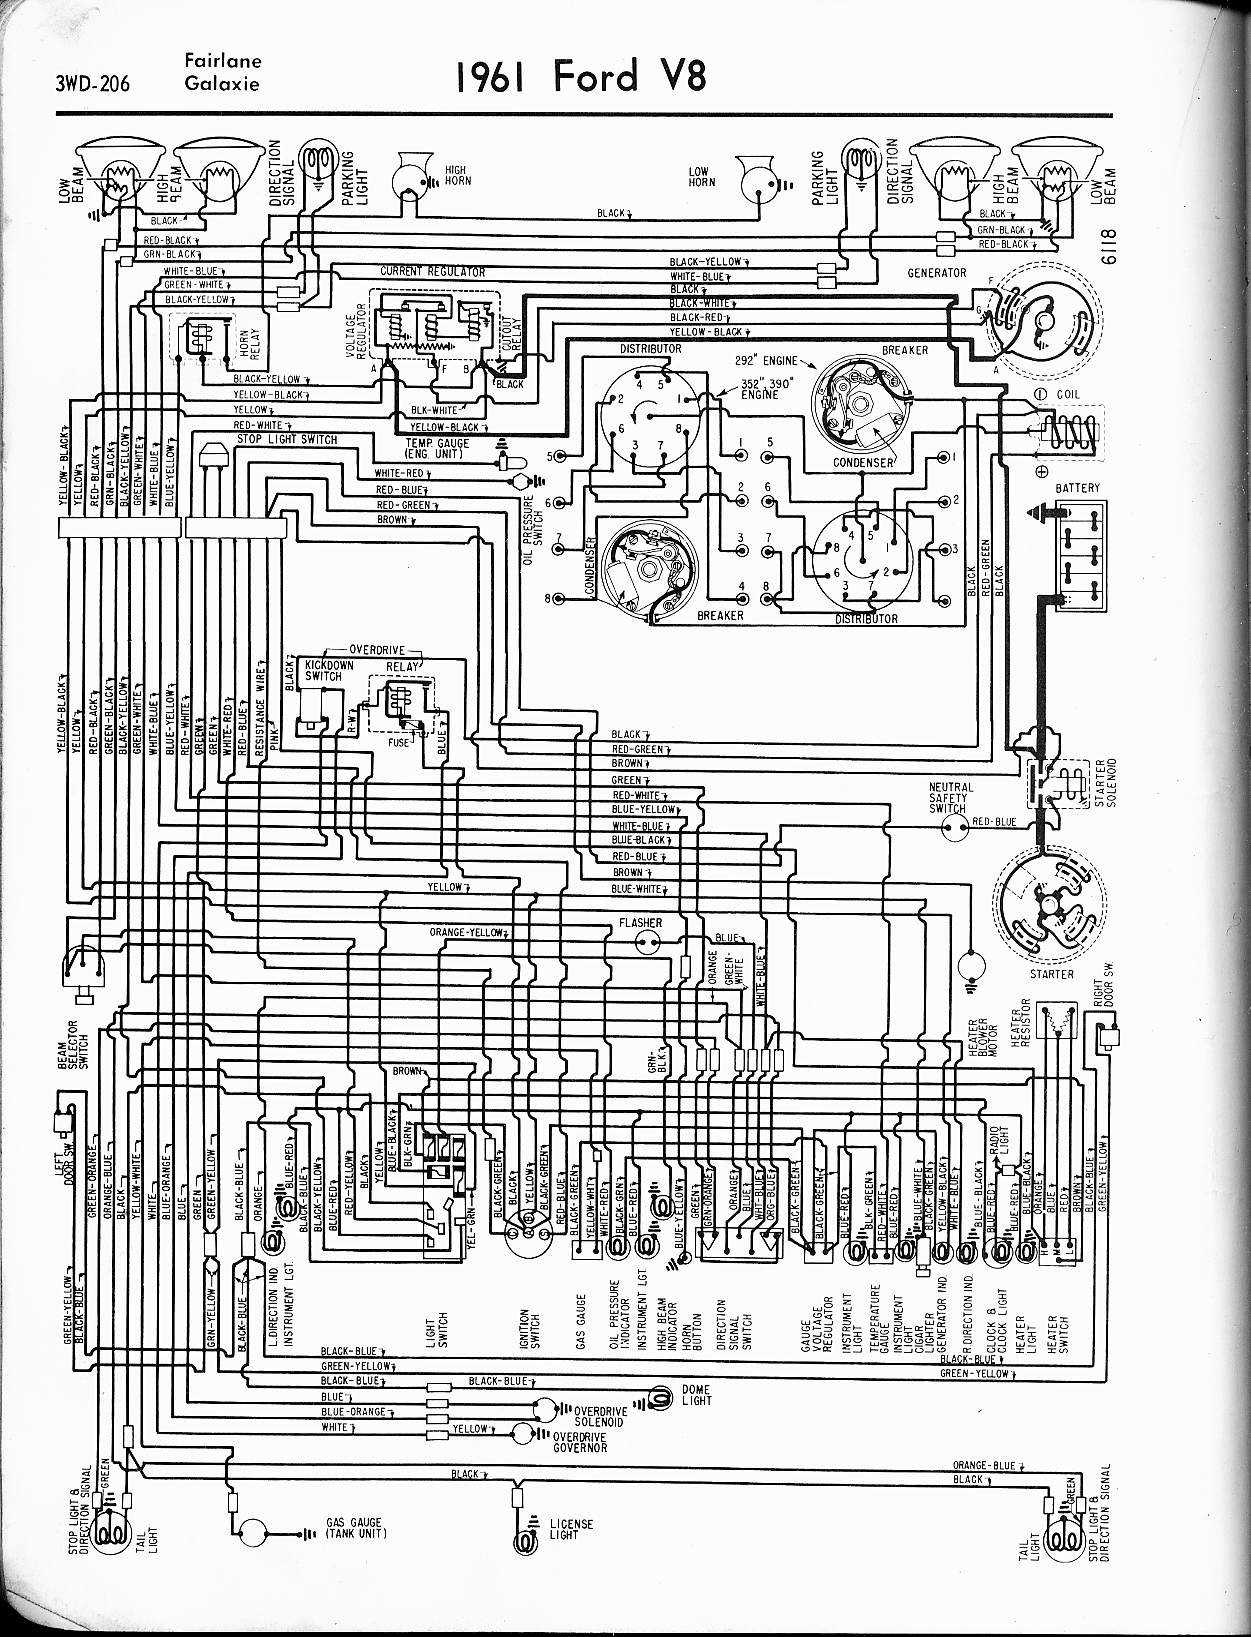 2003 ford Explorer Parts Diagram ford Wiring Diagram ford Wiring Diagram Http 1957 ford Wiring